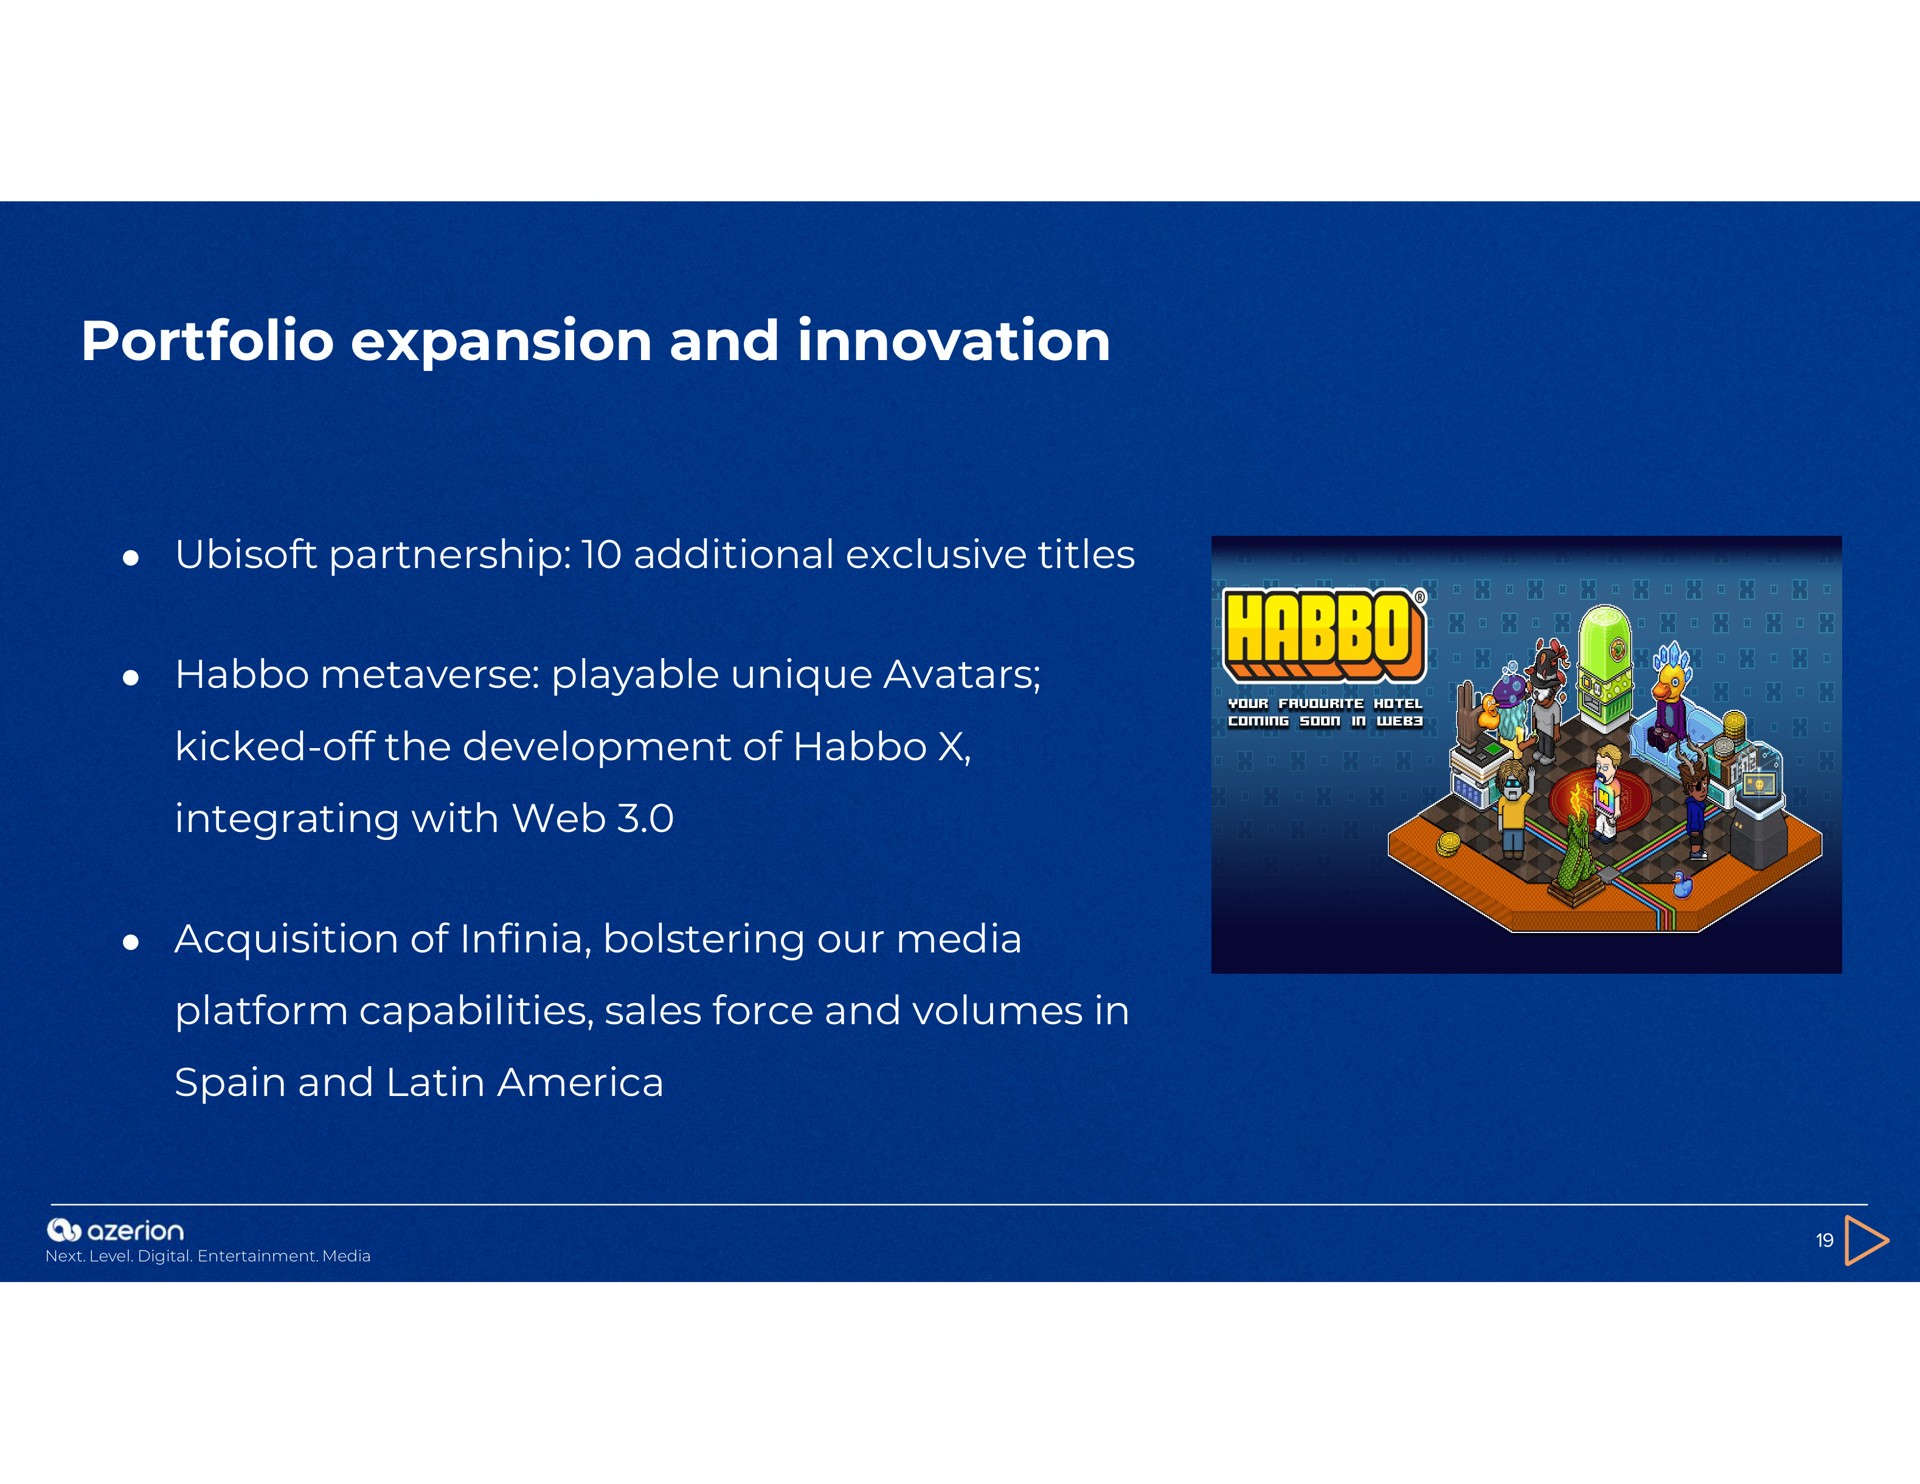 portfolio expansion and innovation partnership additional exclusive titles playable unique kicked off the development of integrating with web acquisition of bolstering our media platform capabilities sales force and volumes in and | Azerion